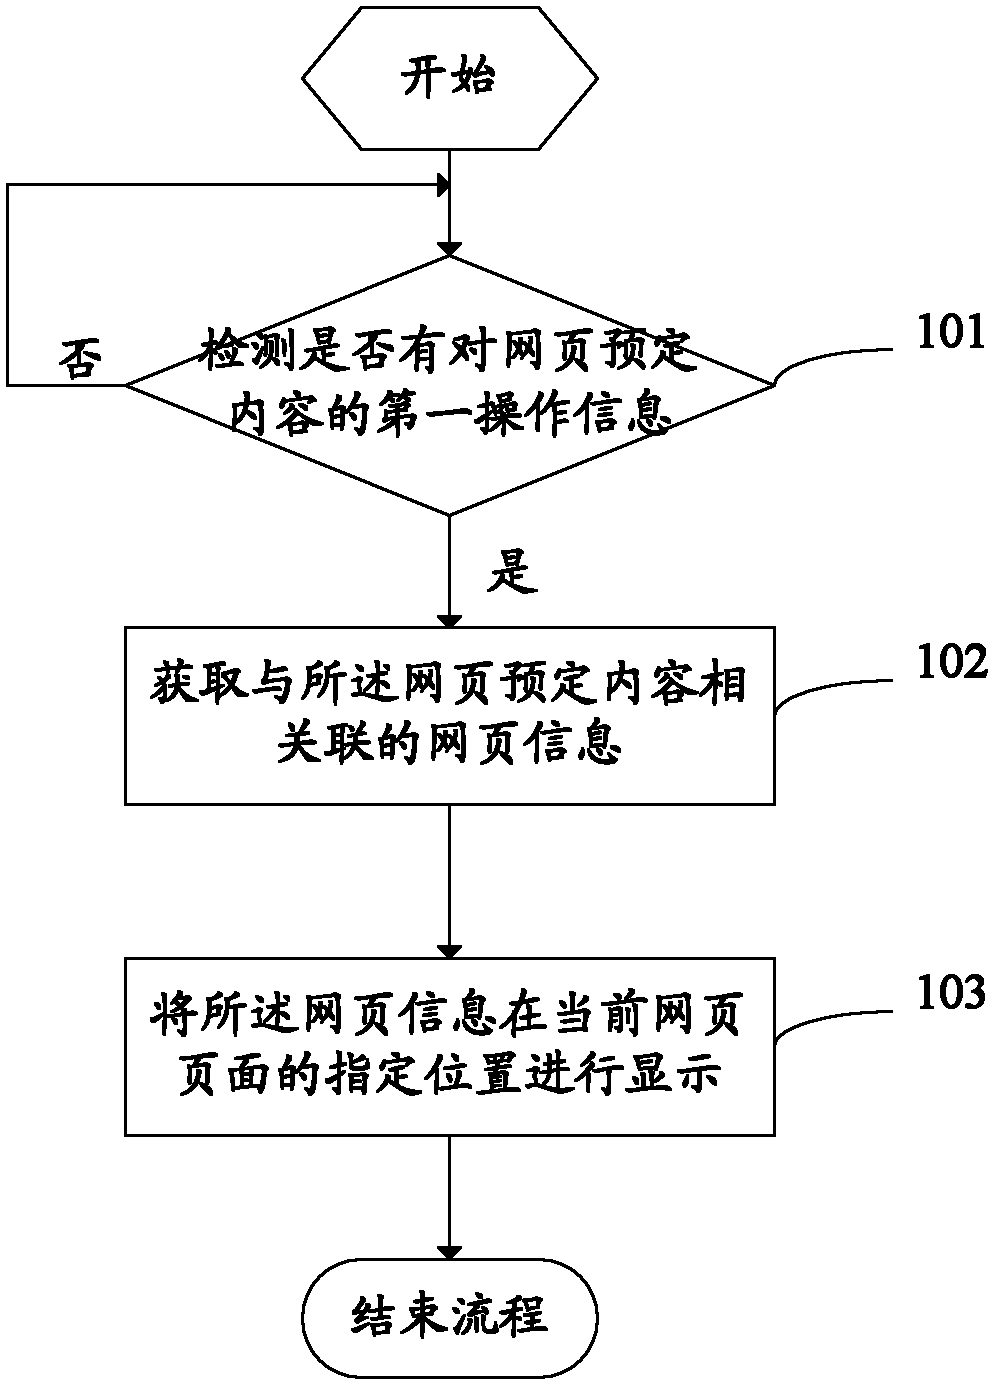 Method and device for displaying webpage information